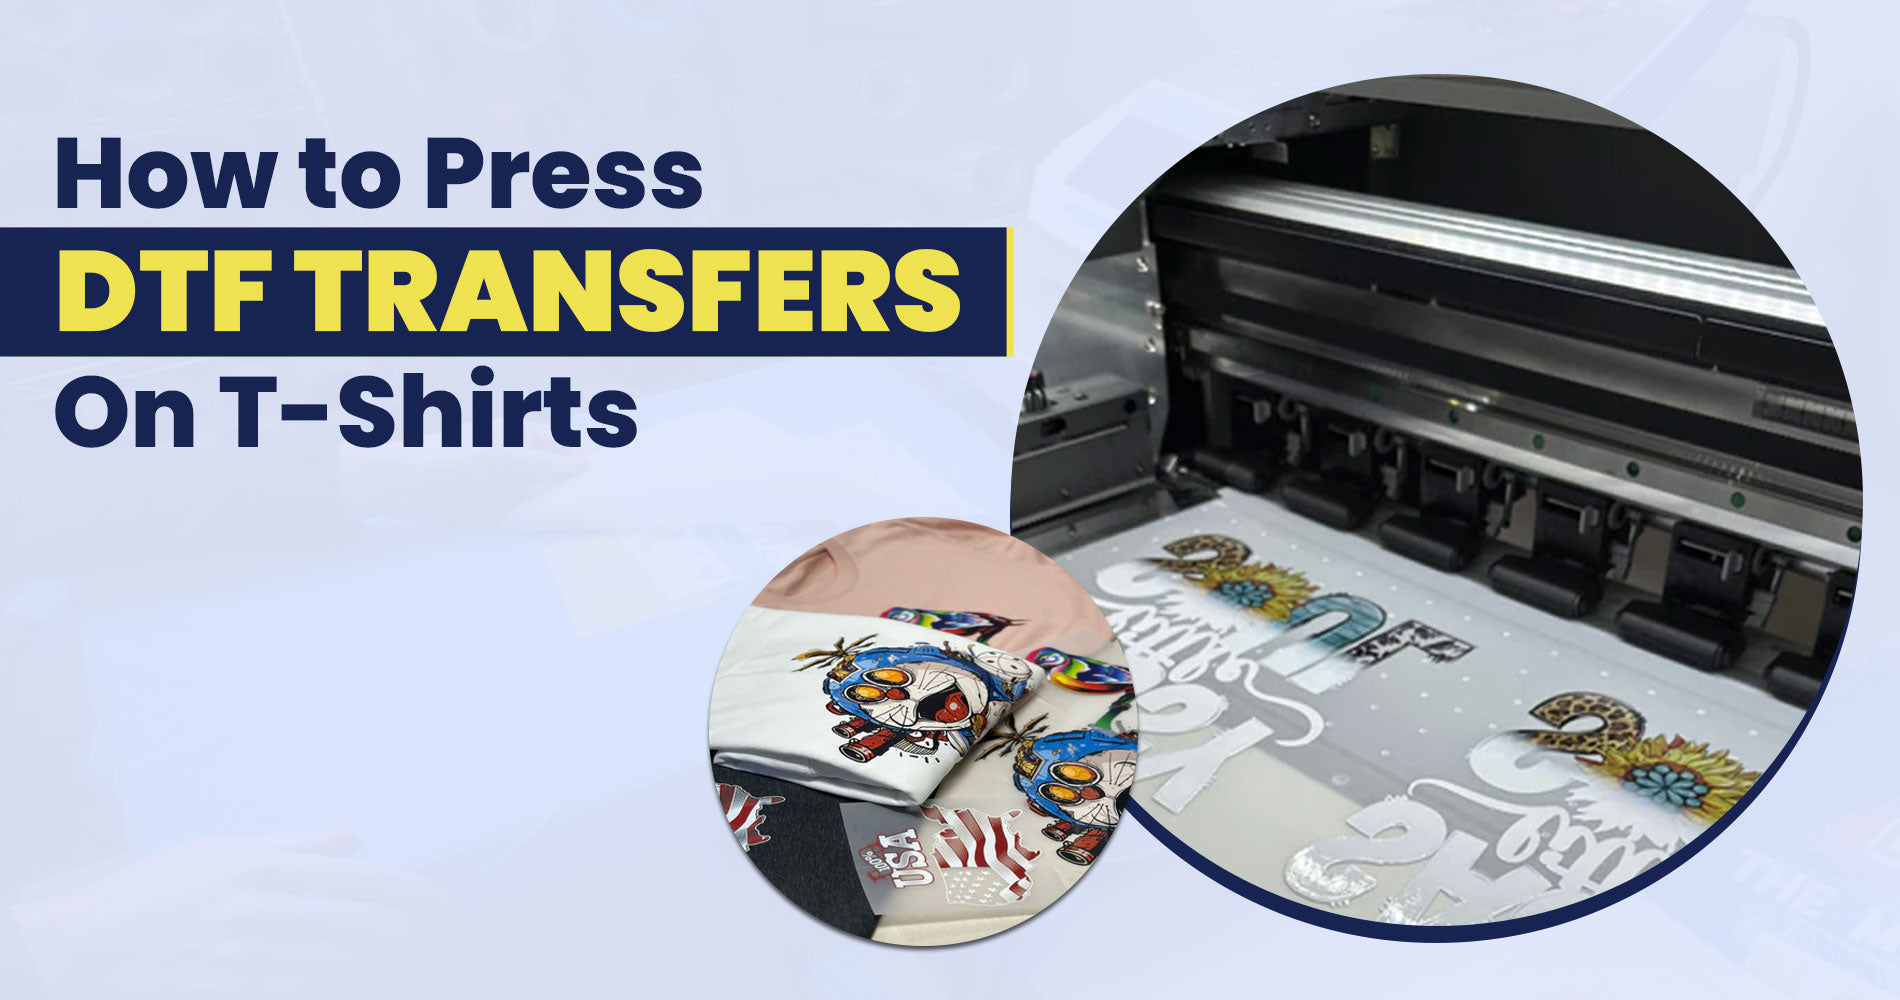 Trendy Transfers: Transfer Designs for Small Businesses - Apparel & More